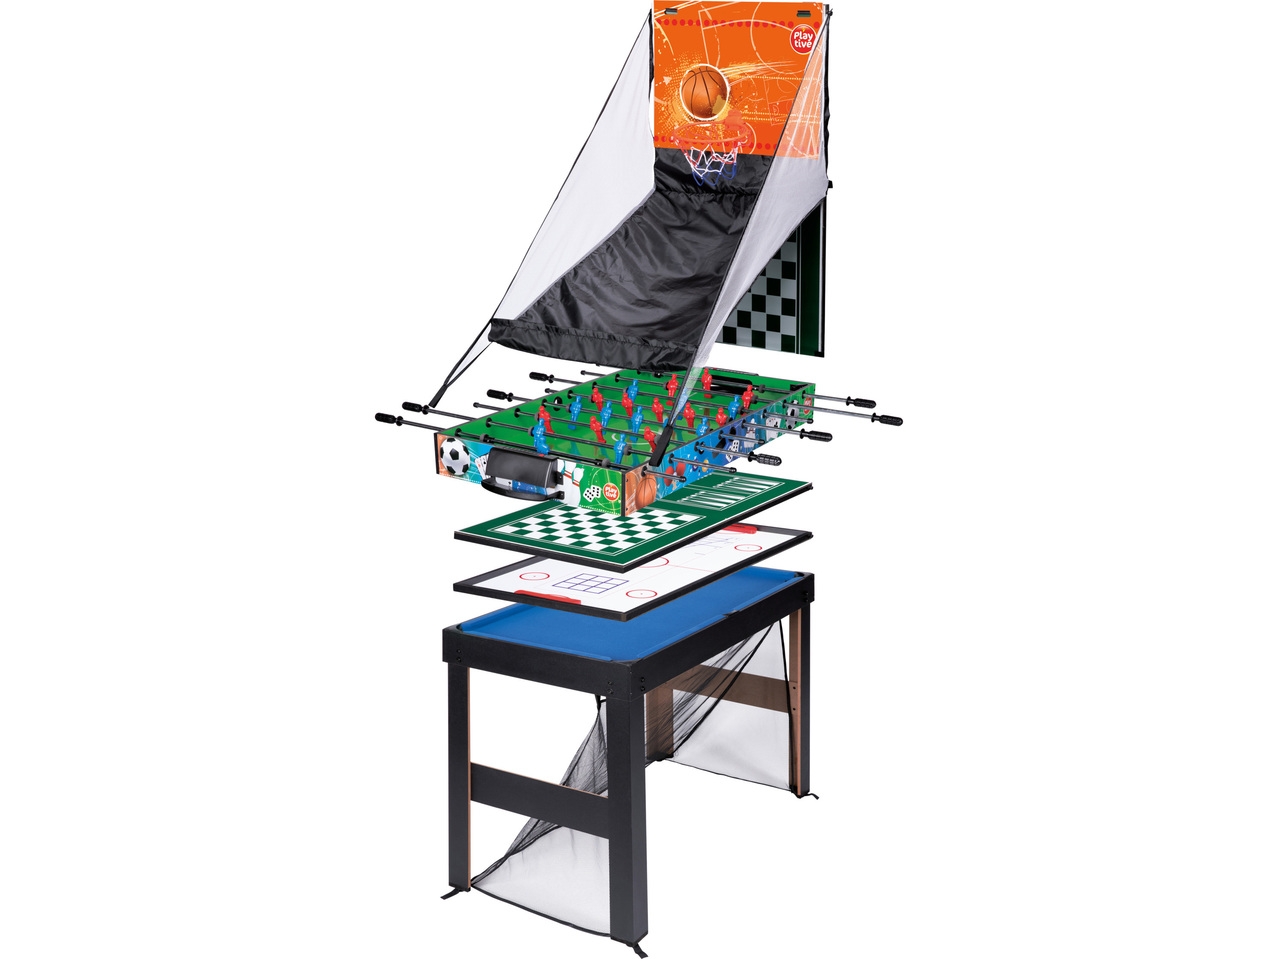 PLAYTIVE 16-in-1 Multi Games Table